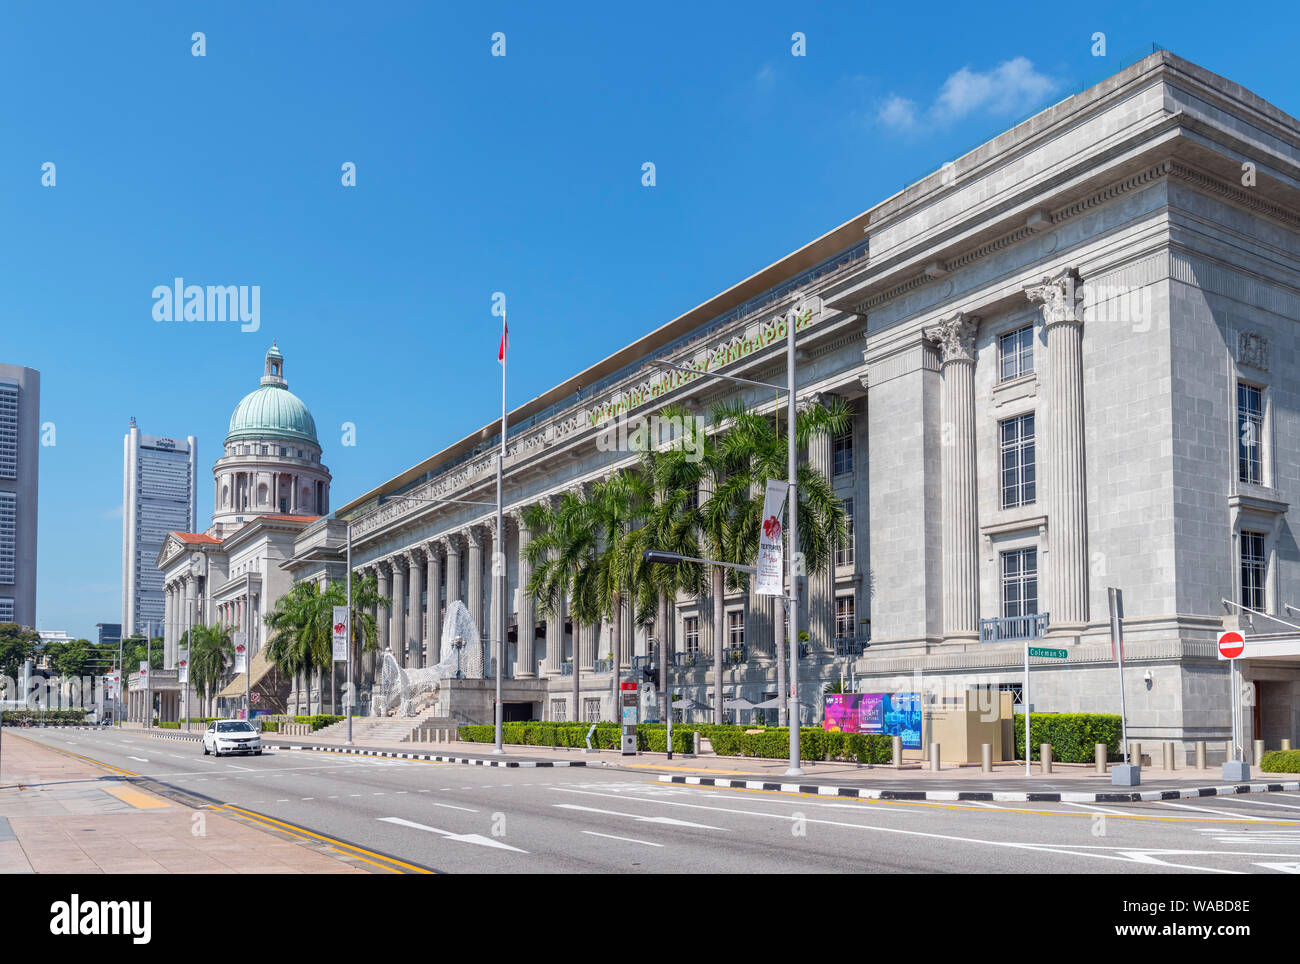 National Gallery of Singapore, housed in the old City Hall and Supreme Court buildings, St Andrew's Road, Singapore City, Singapore Stock Photo